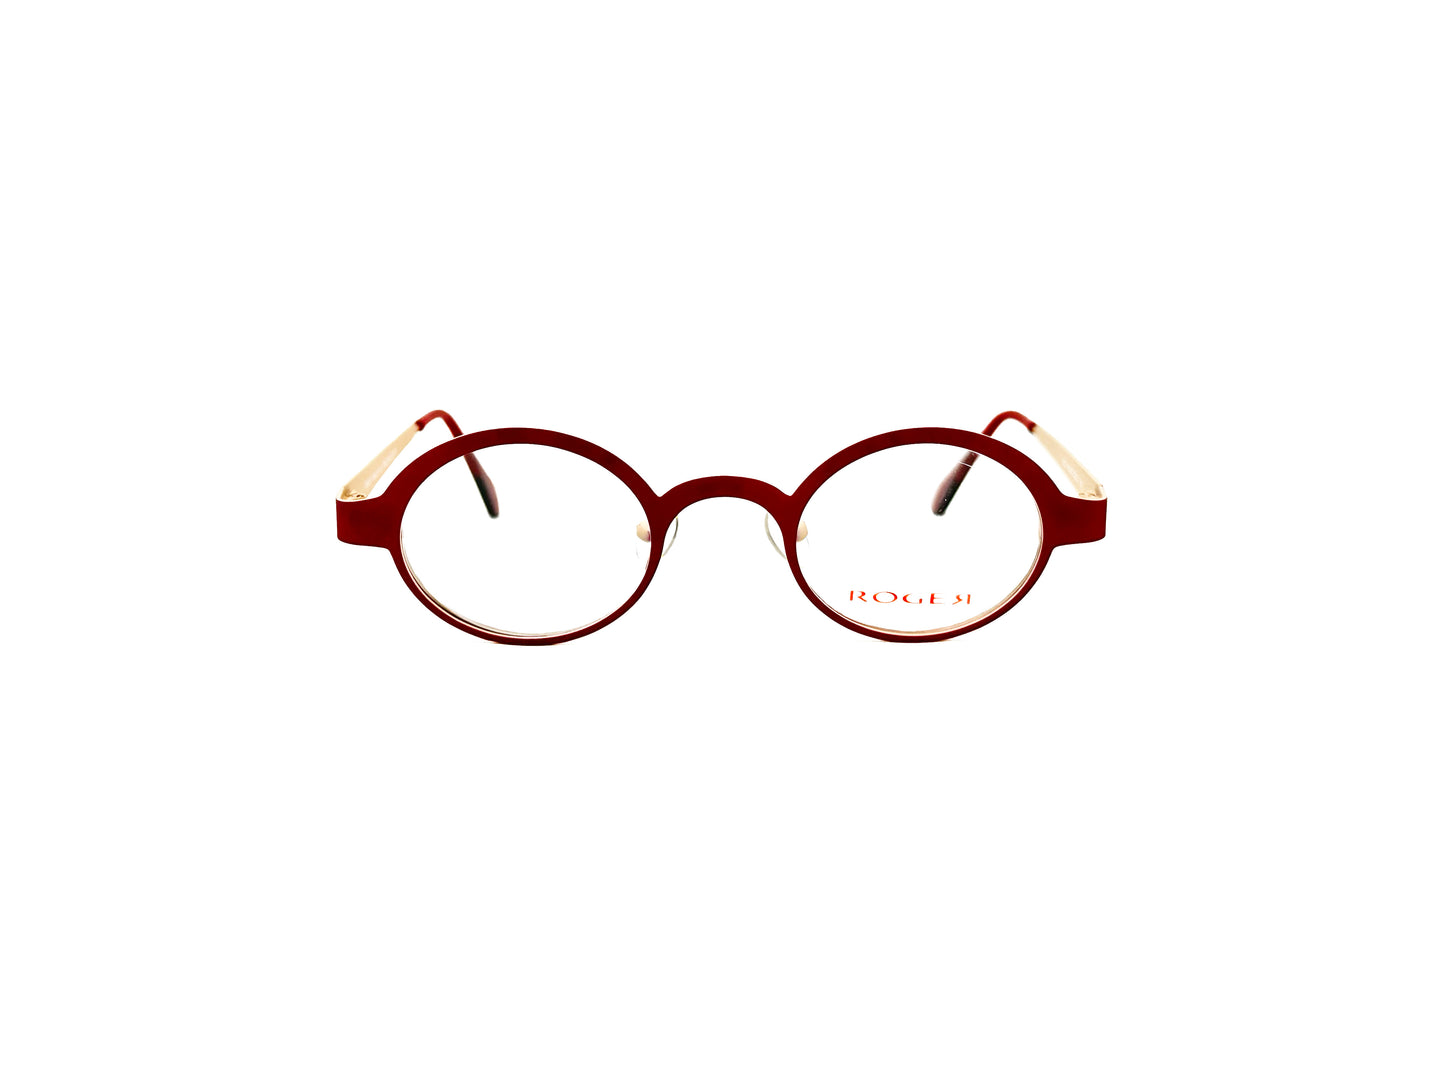 Roger oval, metal, optical frames . Model: Dee. Color: 2 Red and cream. Front view. 